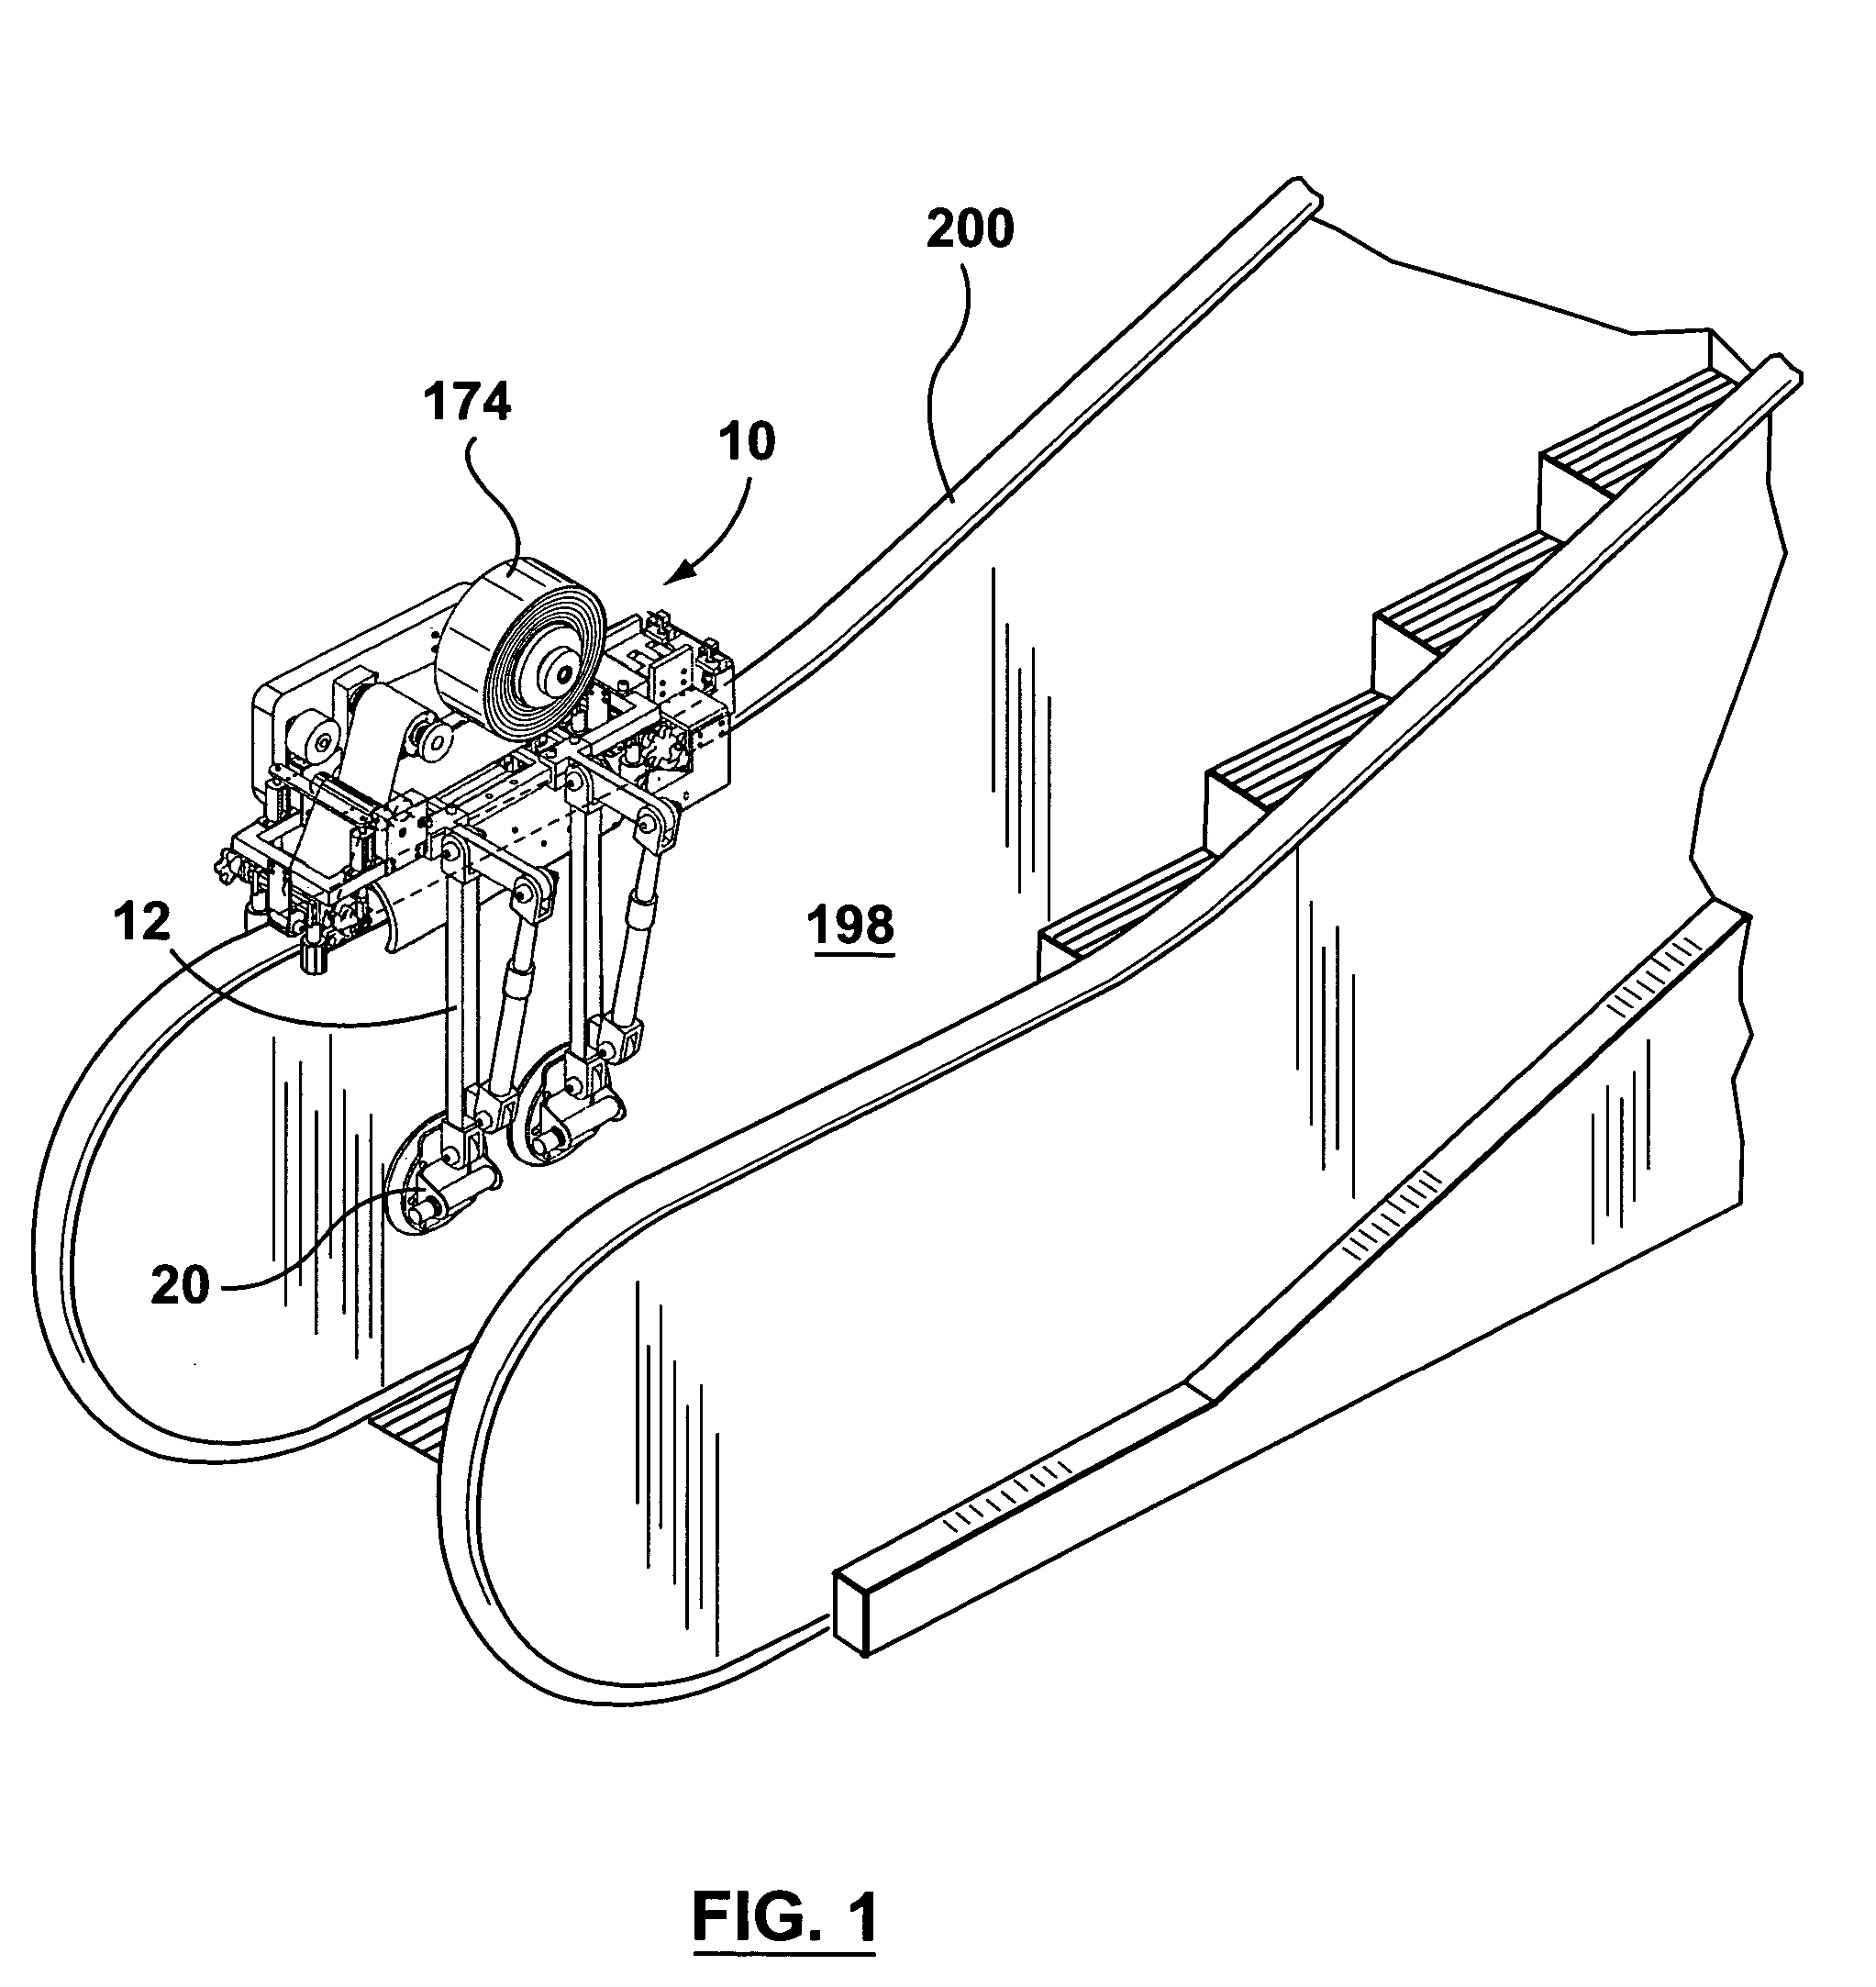 Method of and apparatus for applying a film optionally including advertising or other visible material, to the surface of a handrail for an escalator or moving walkway